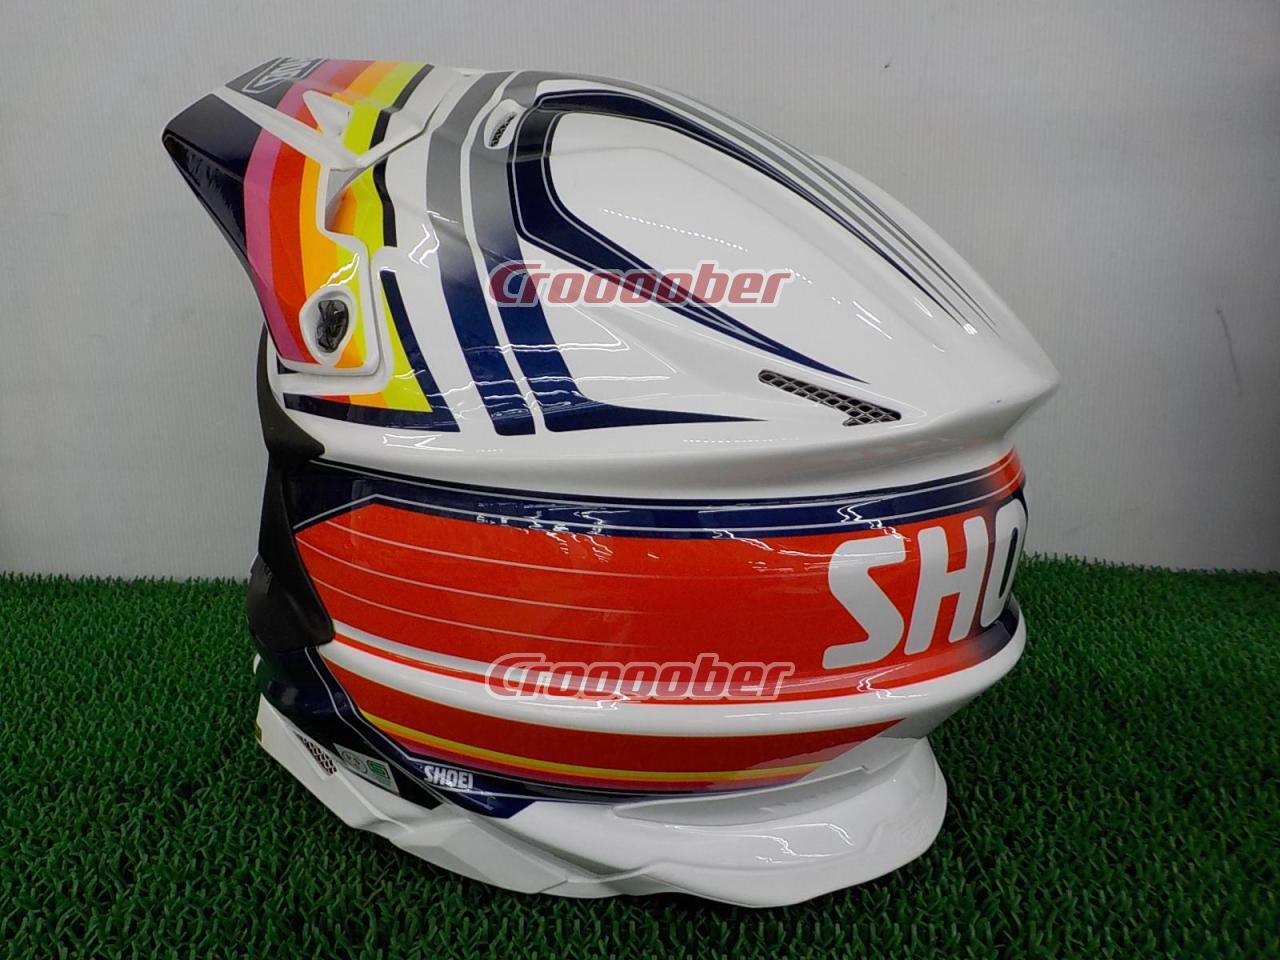 Size: L Shoei VFX-WR Double Are Pinnacle / Off-road Helmet